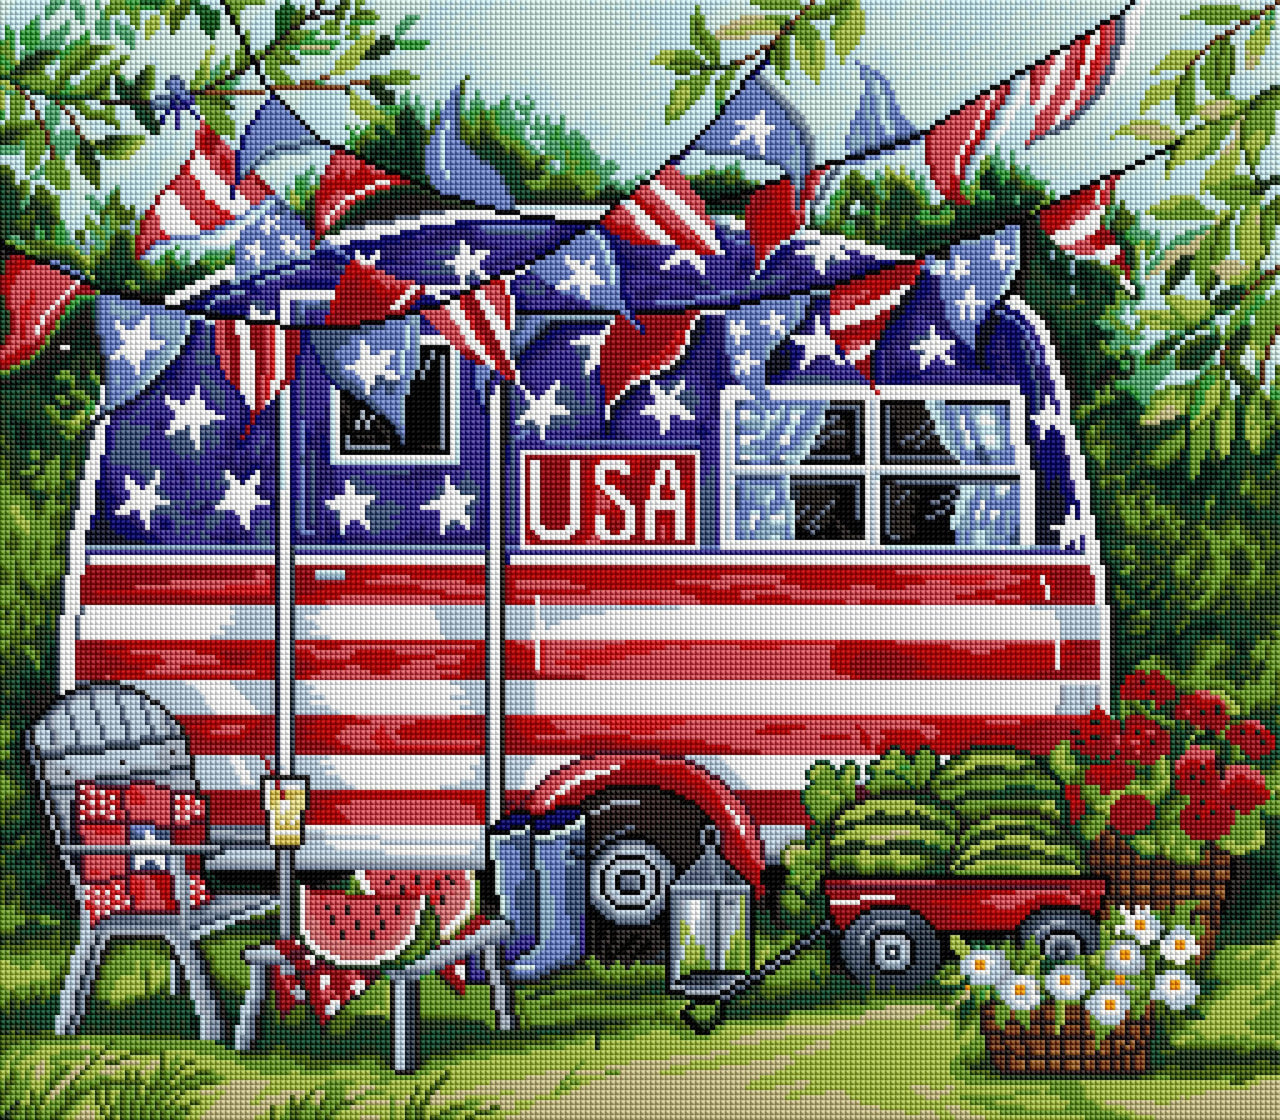 Diamond Painting Patriotic Camper 25" x 22" (64cm x 56cm) / Square with 43 Colors including 4 ABs / 57,344